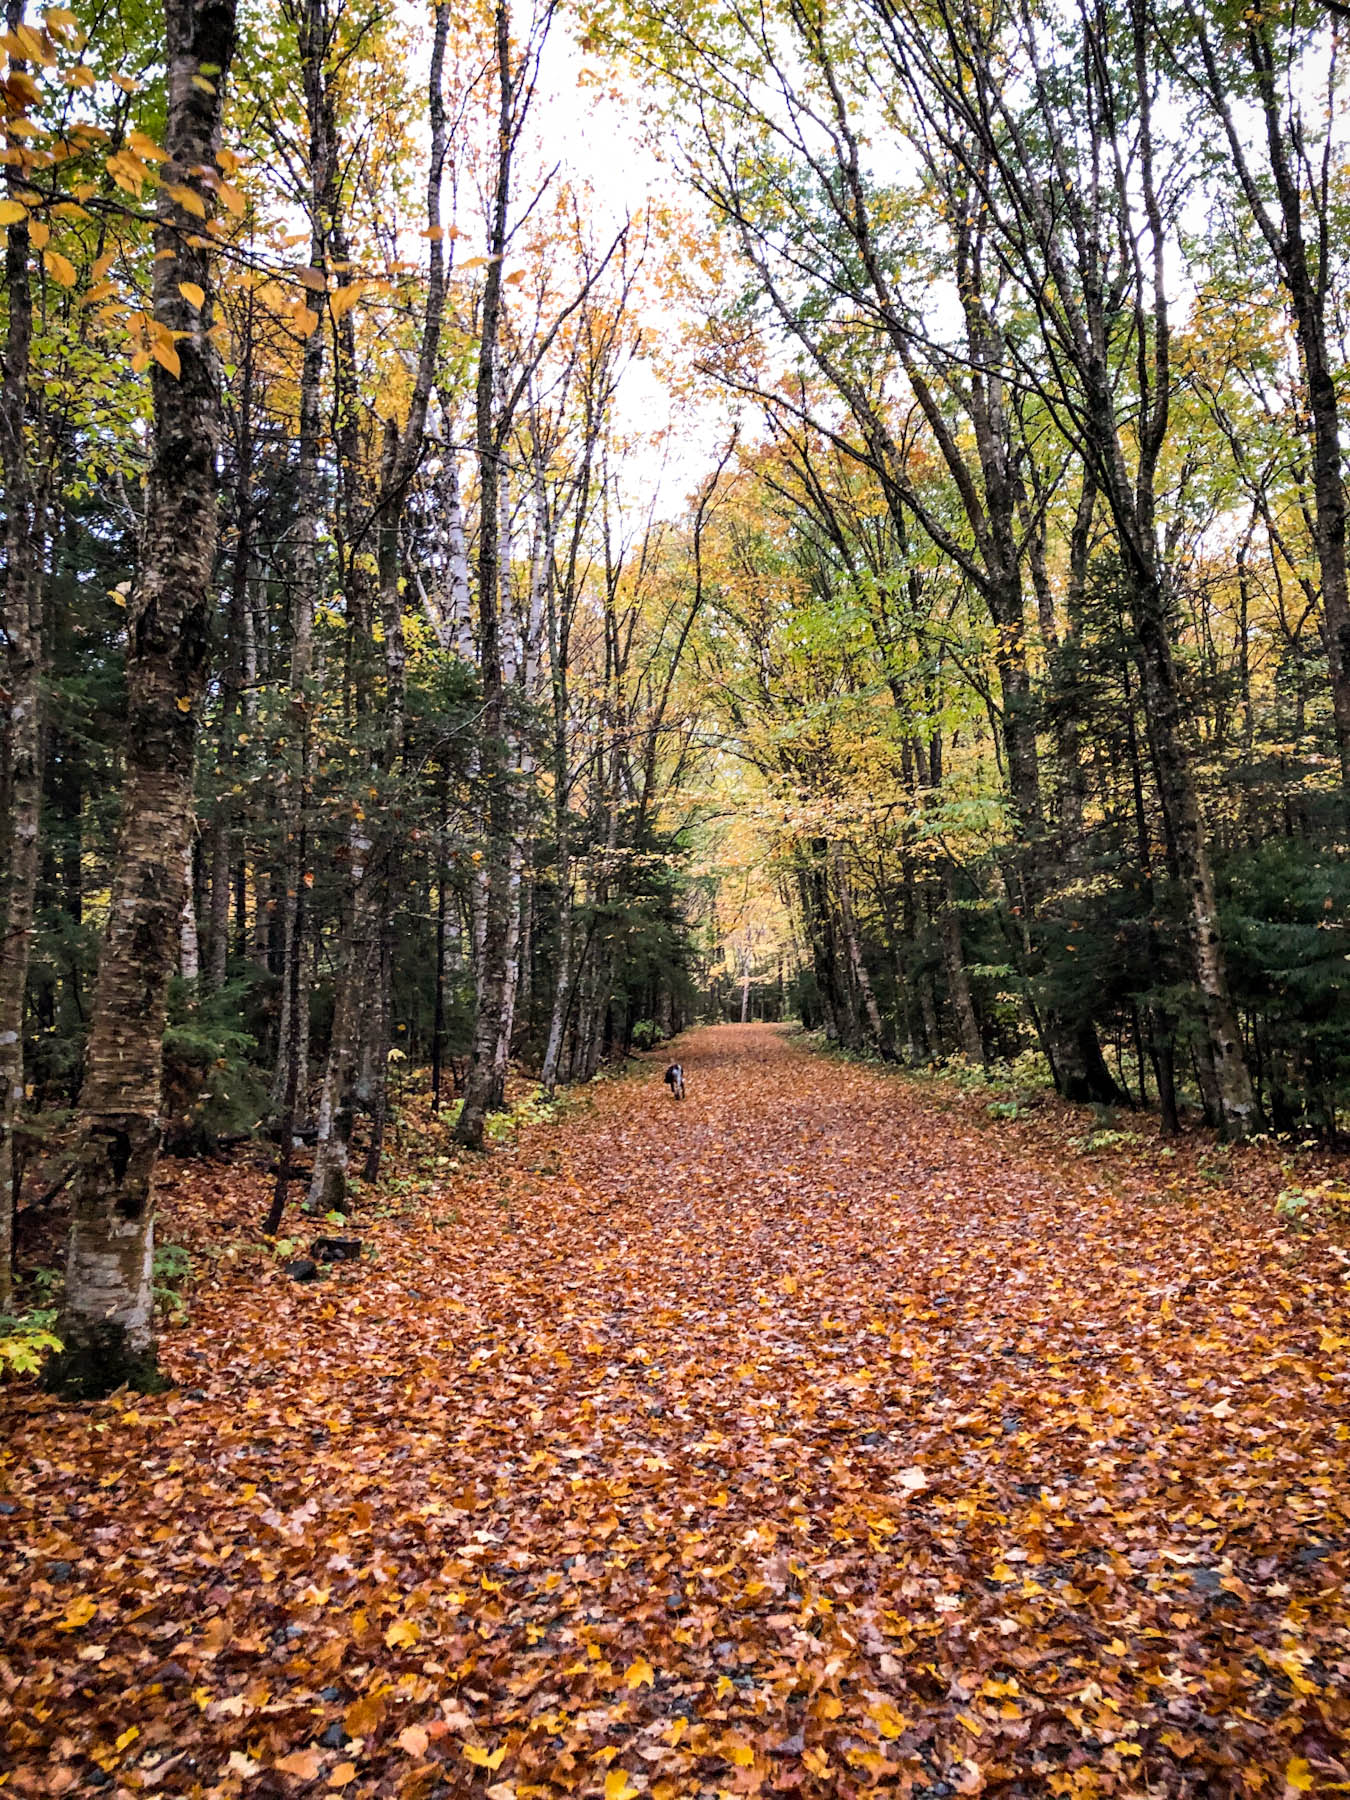 Hiking trail covered with orange and brown leaves